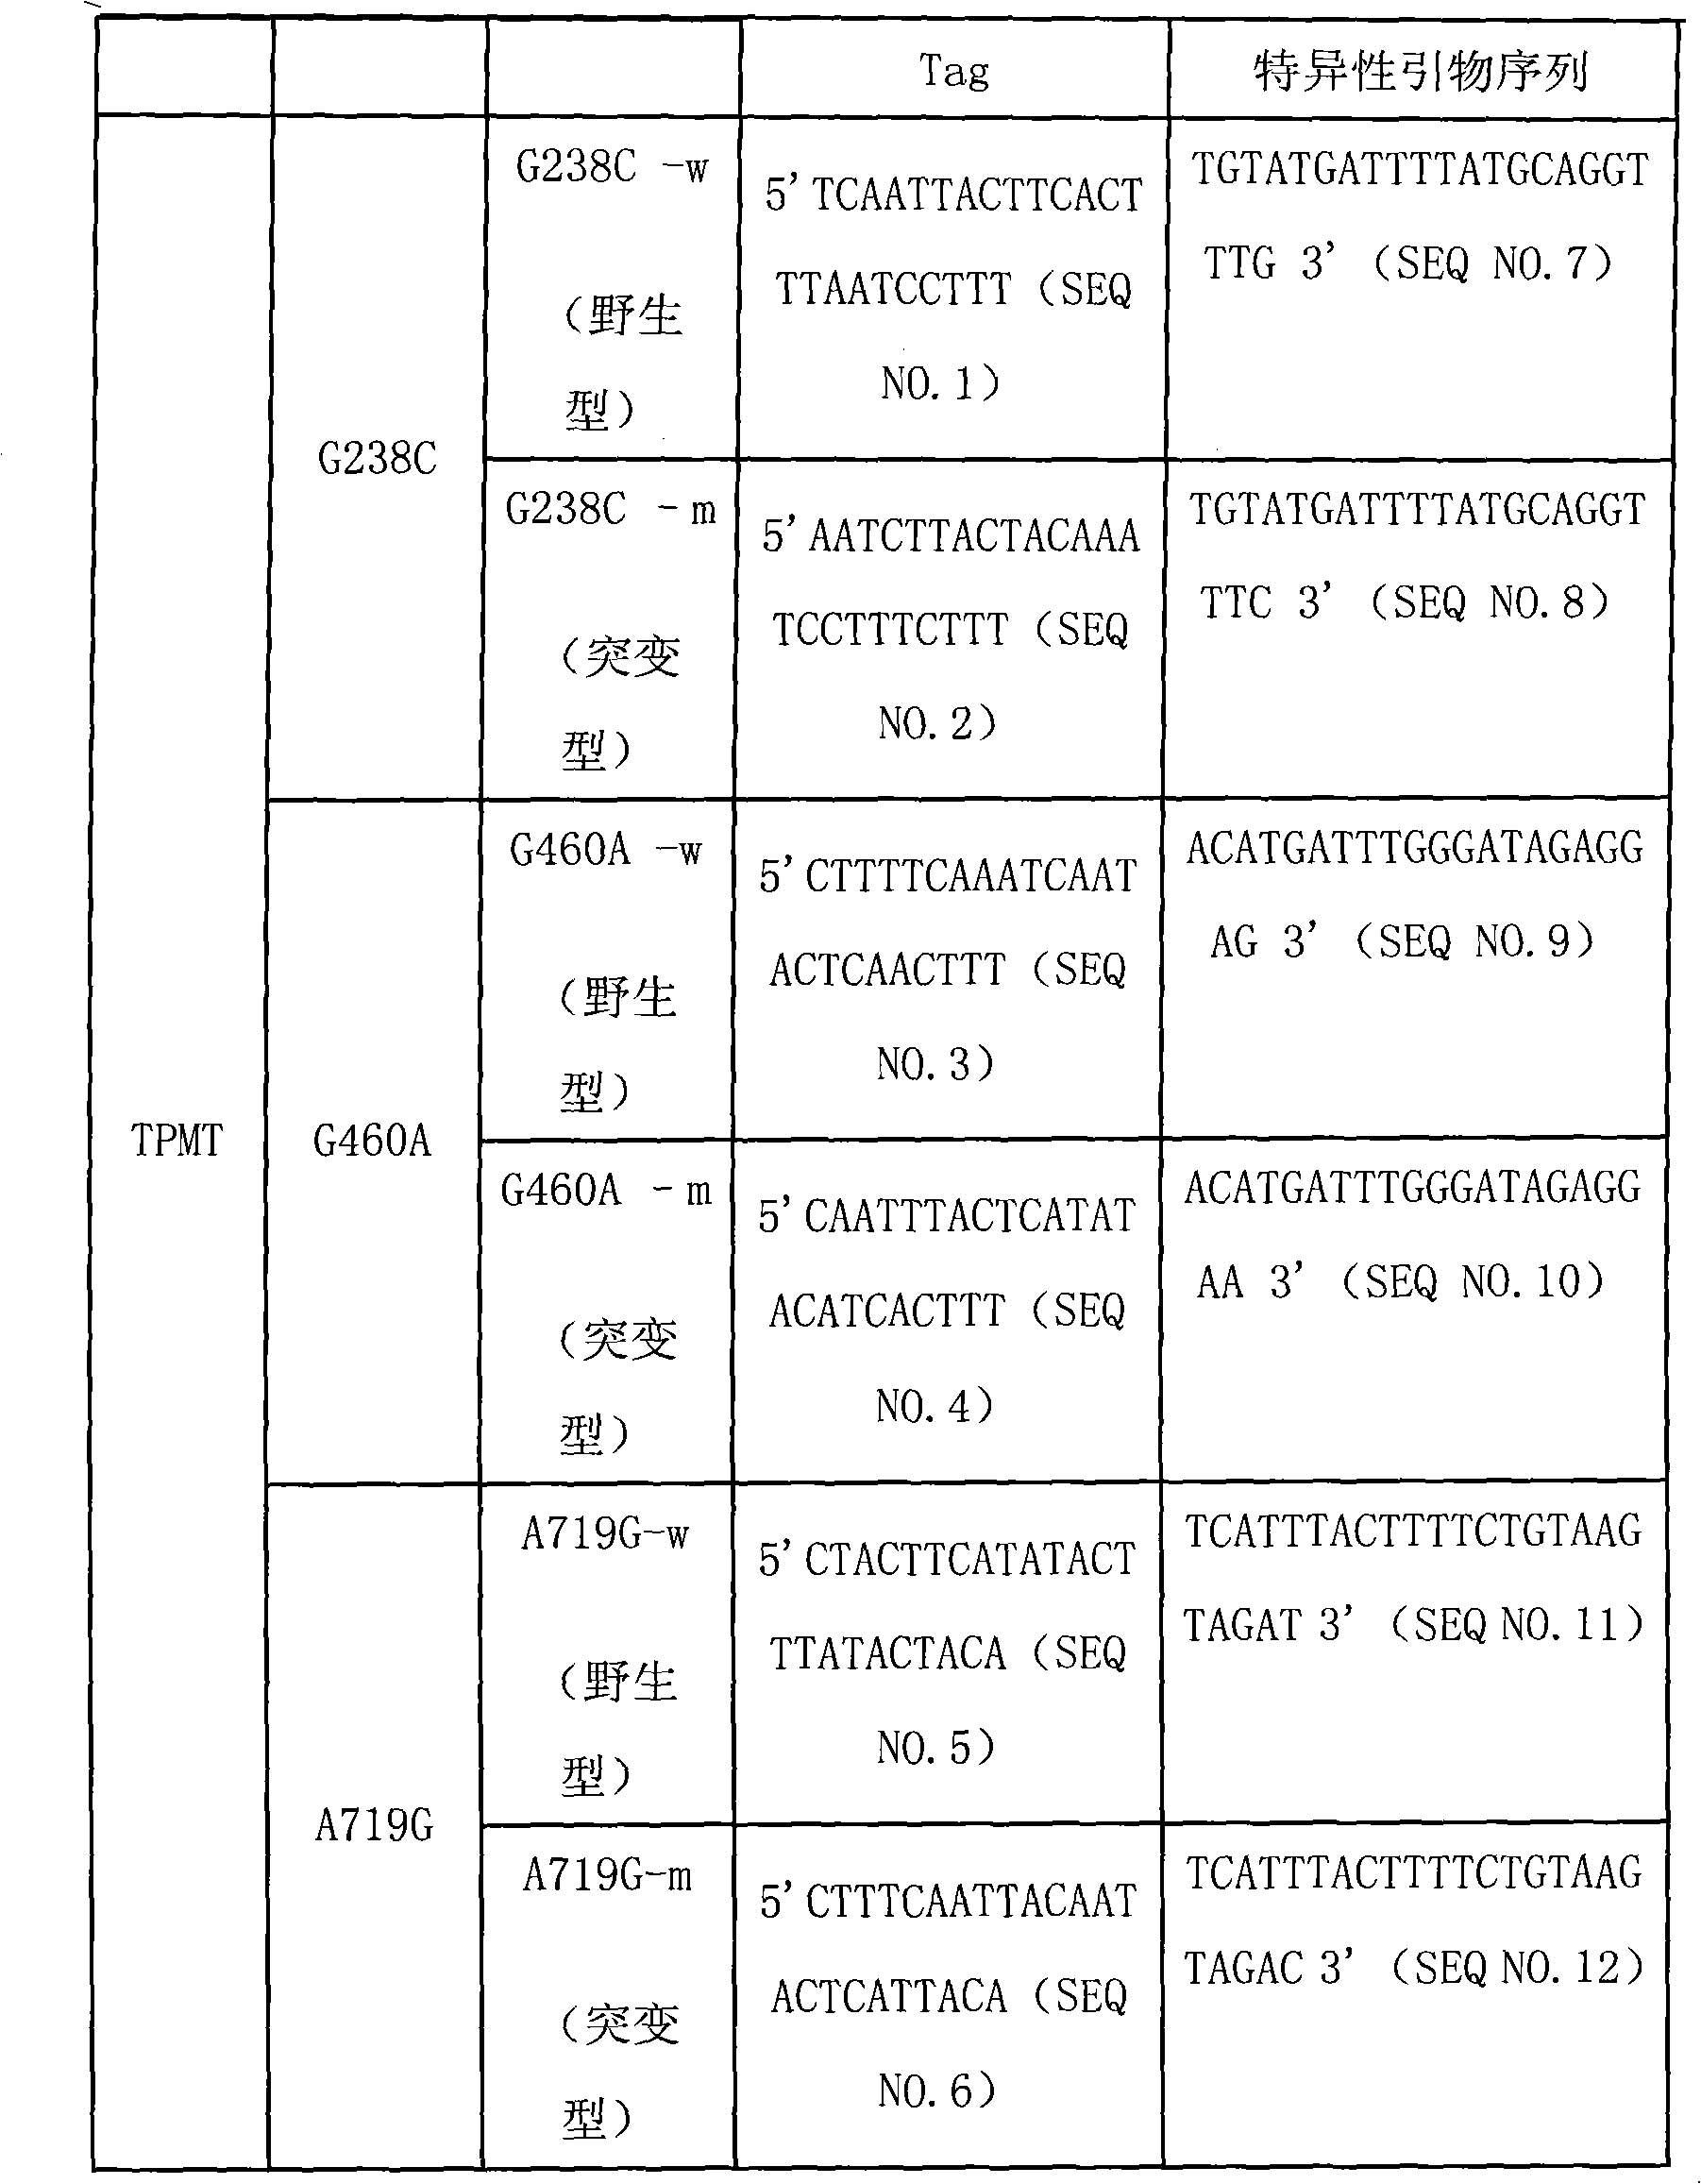 Specific sequence, liquid phase chip and method for SNP detection of TPMT gene